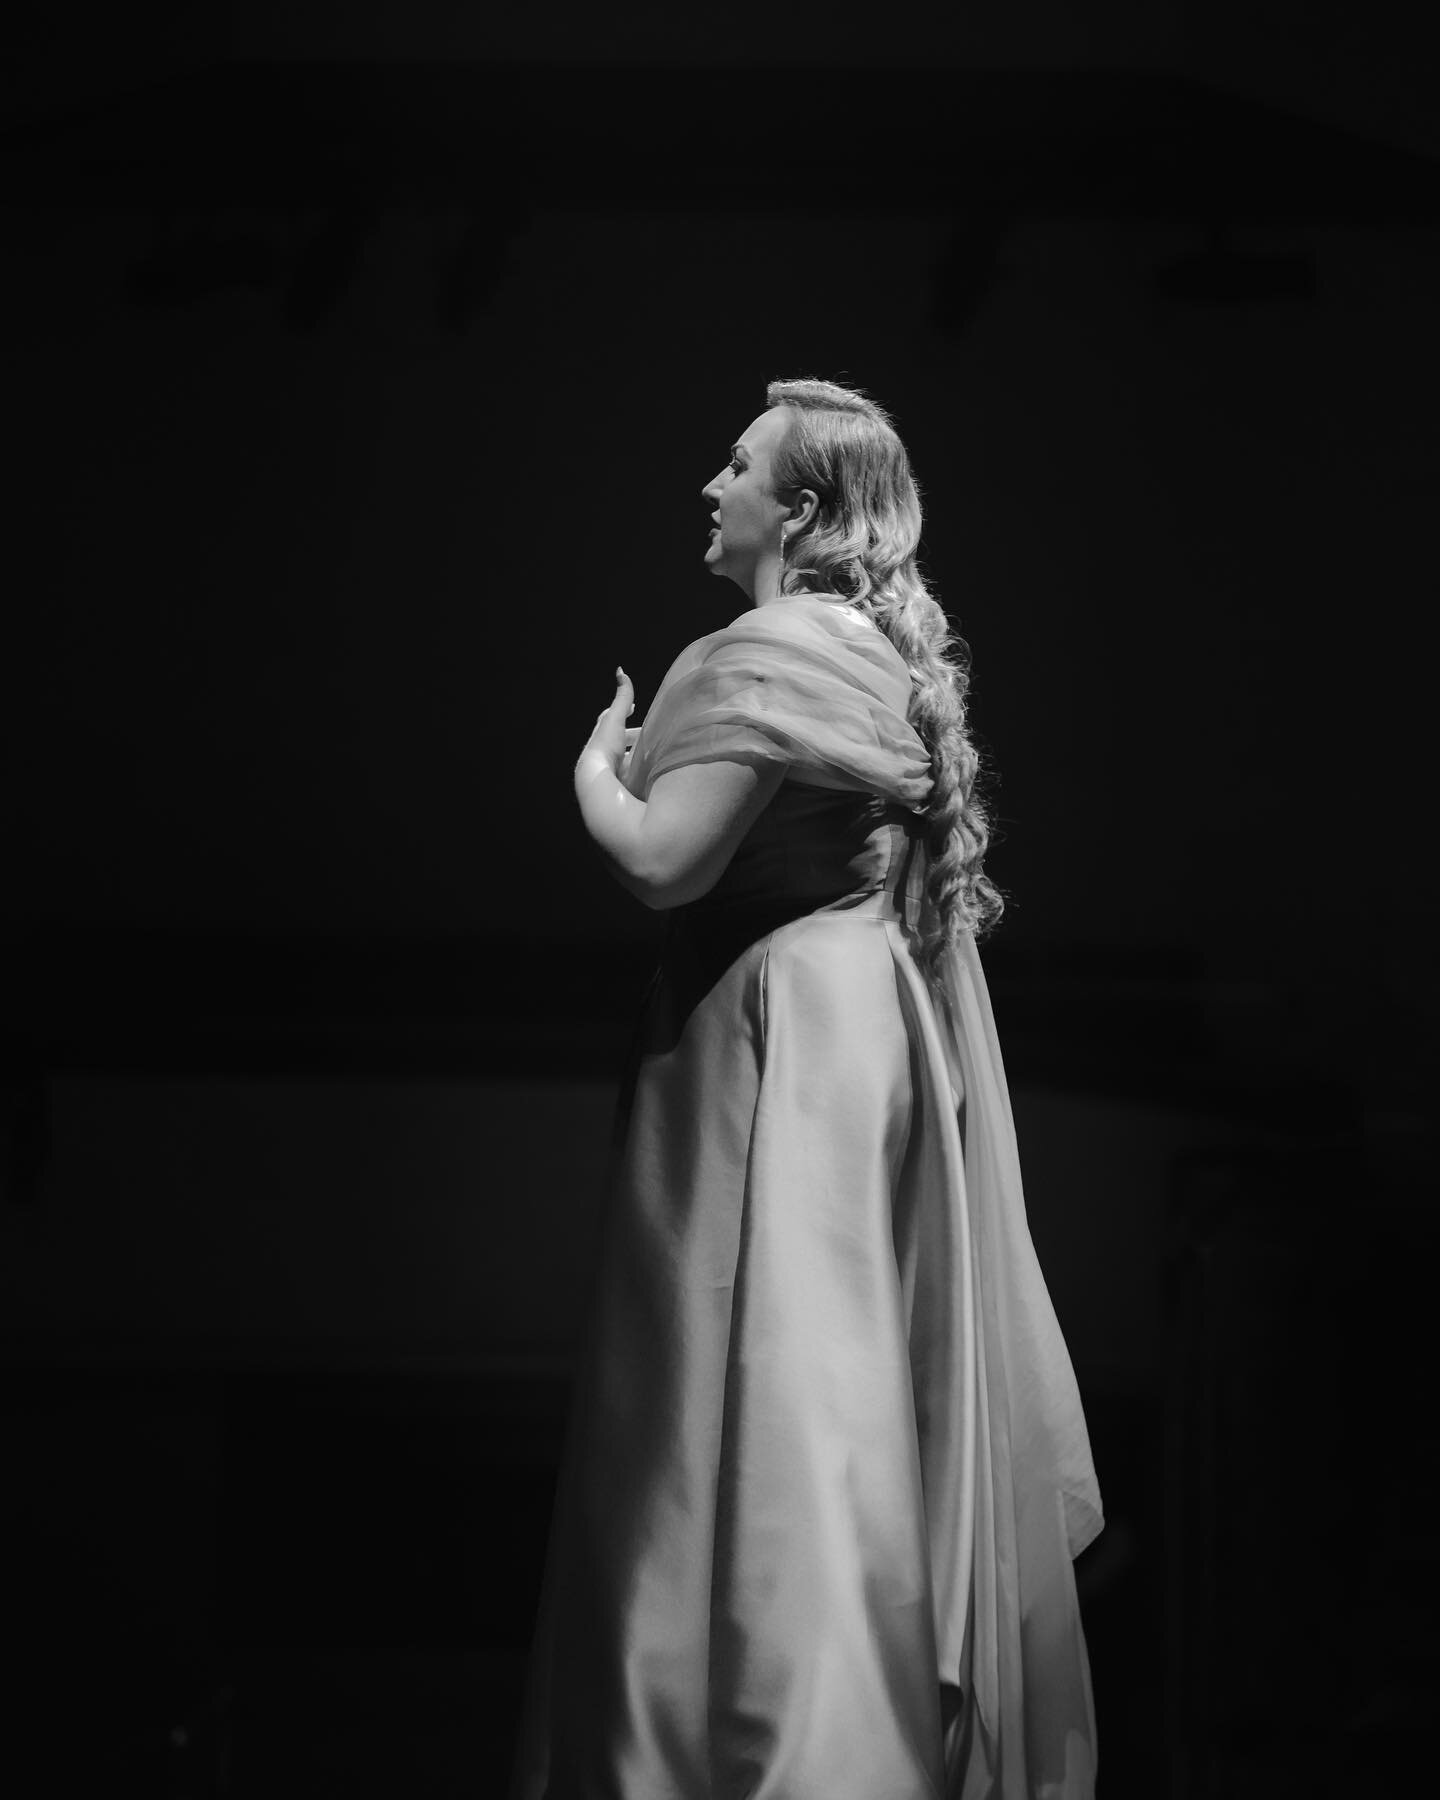 While my love affair with B&amp;W continues, @rebeccacassidy_soprano&rsquo;s spectacular red dress was pretty breathtaking at @operaqueensland&rsquo;s Verdi this past weekend. Swipe to see it in its full colour glory.